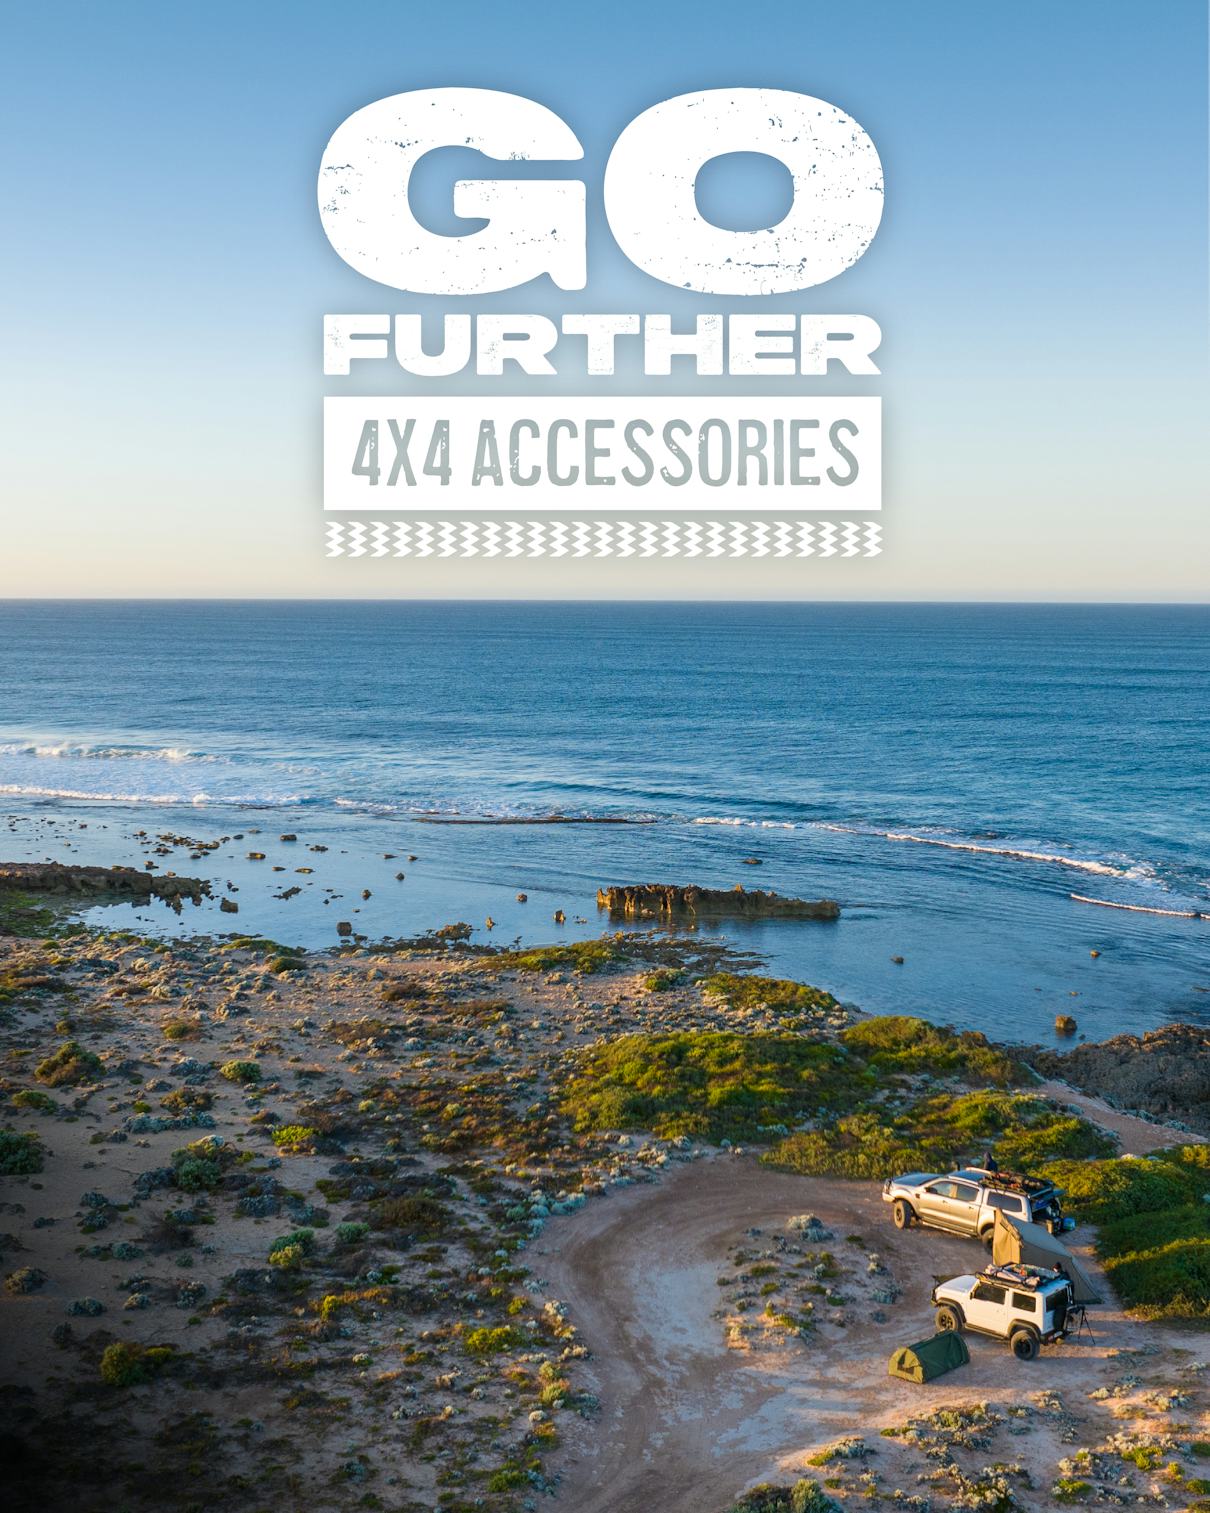 View of coast bay with caption of "Go Further 4x4 Accessories"